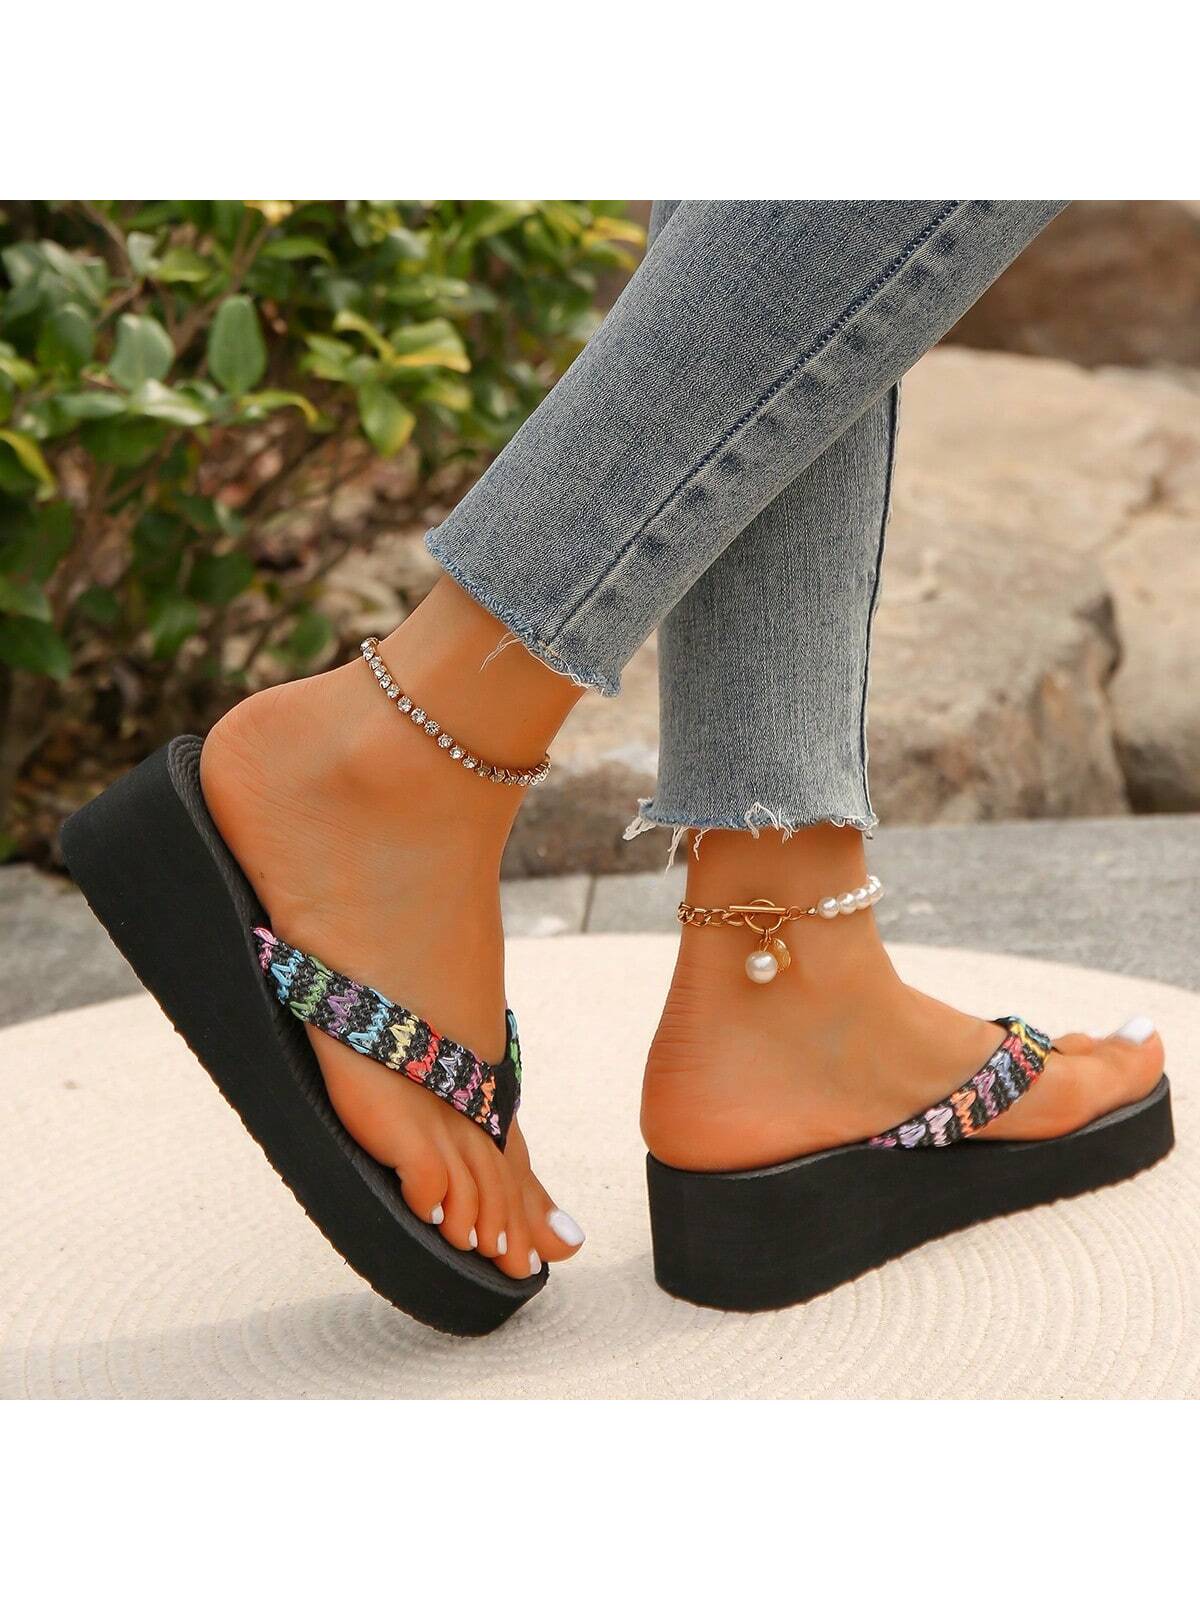 Women Thick-Soled 5cm Wedge Heel  Rope Flip-Flops Shoes, Anti-Slip And Wear-Resistant, Suitable For Casual Beach Holiday, Summer Wind Slope Heeled Slippers-Black-6